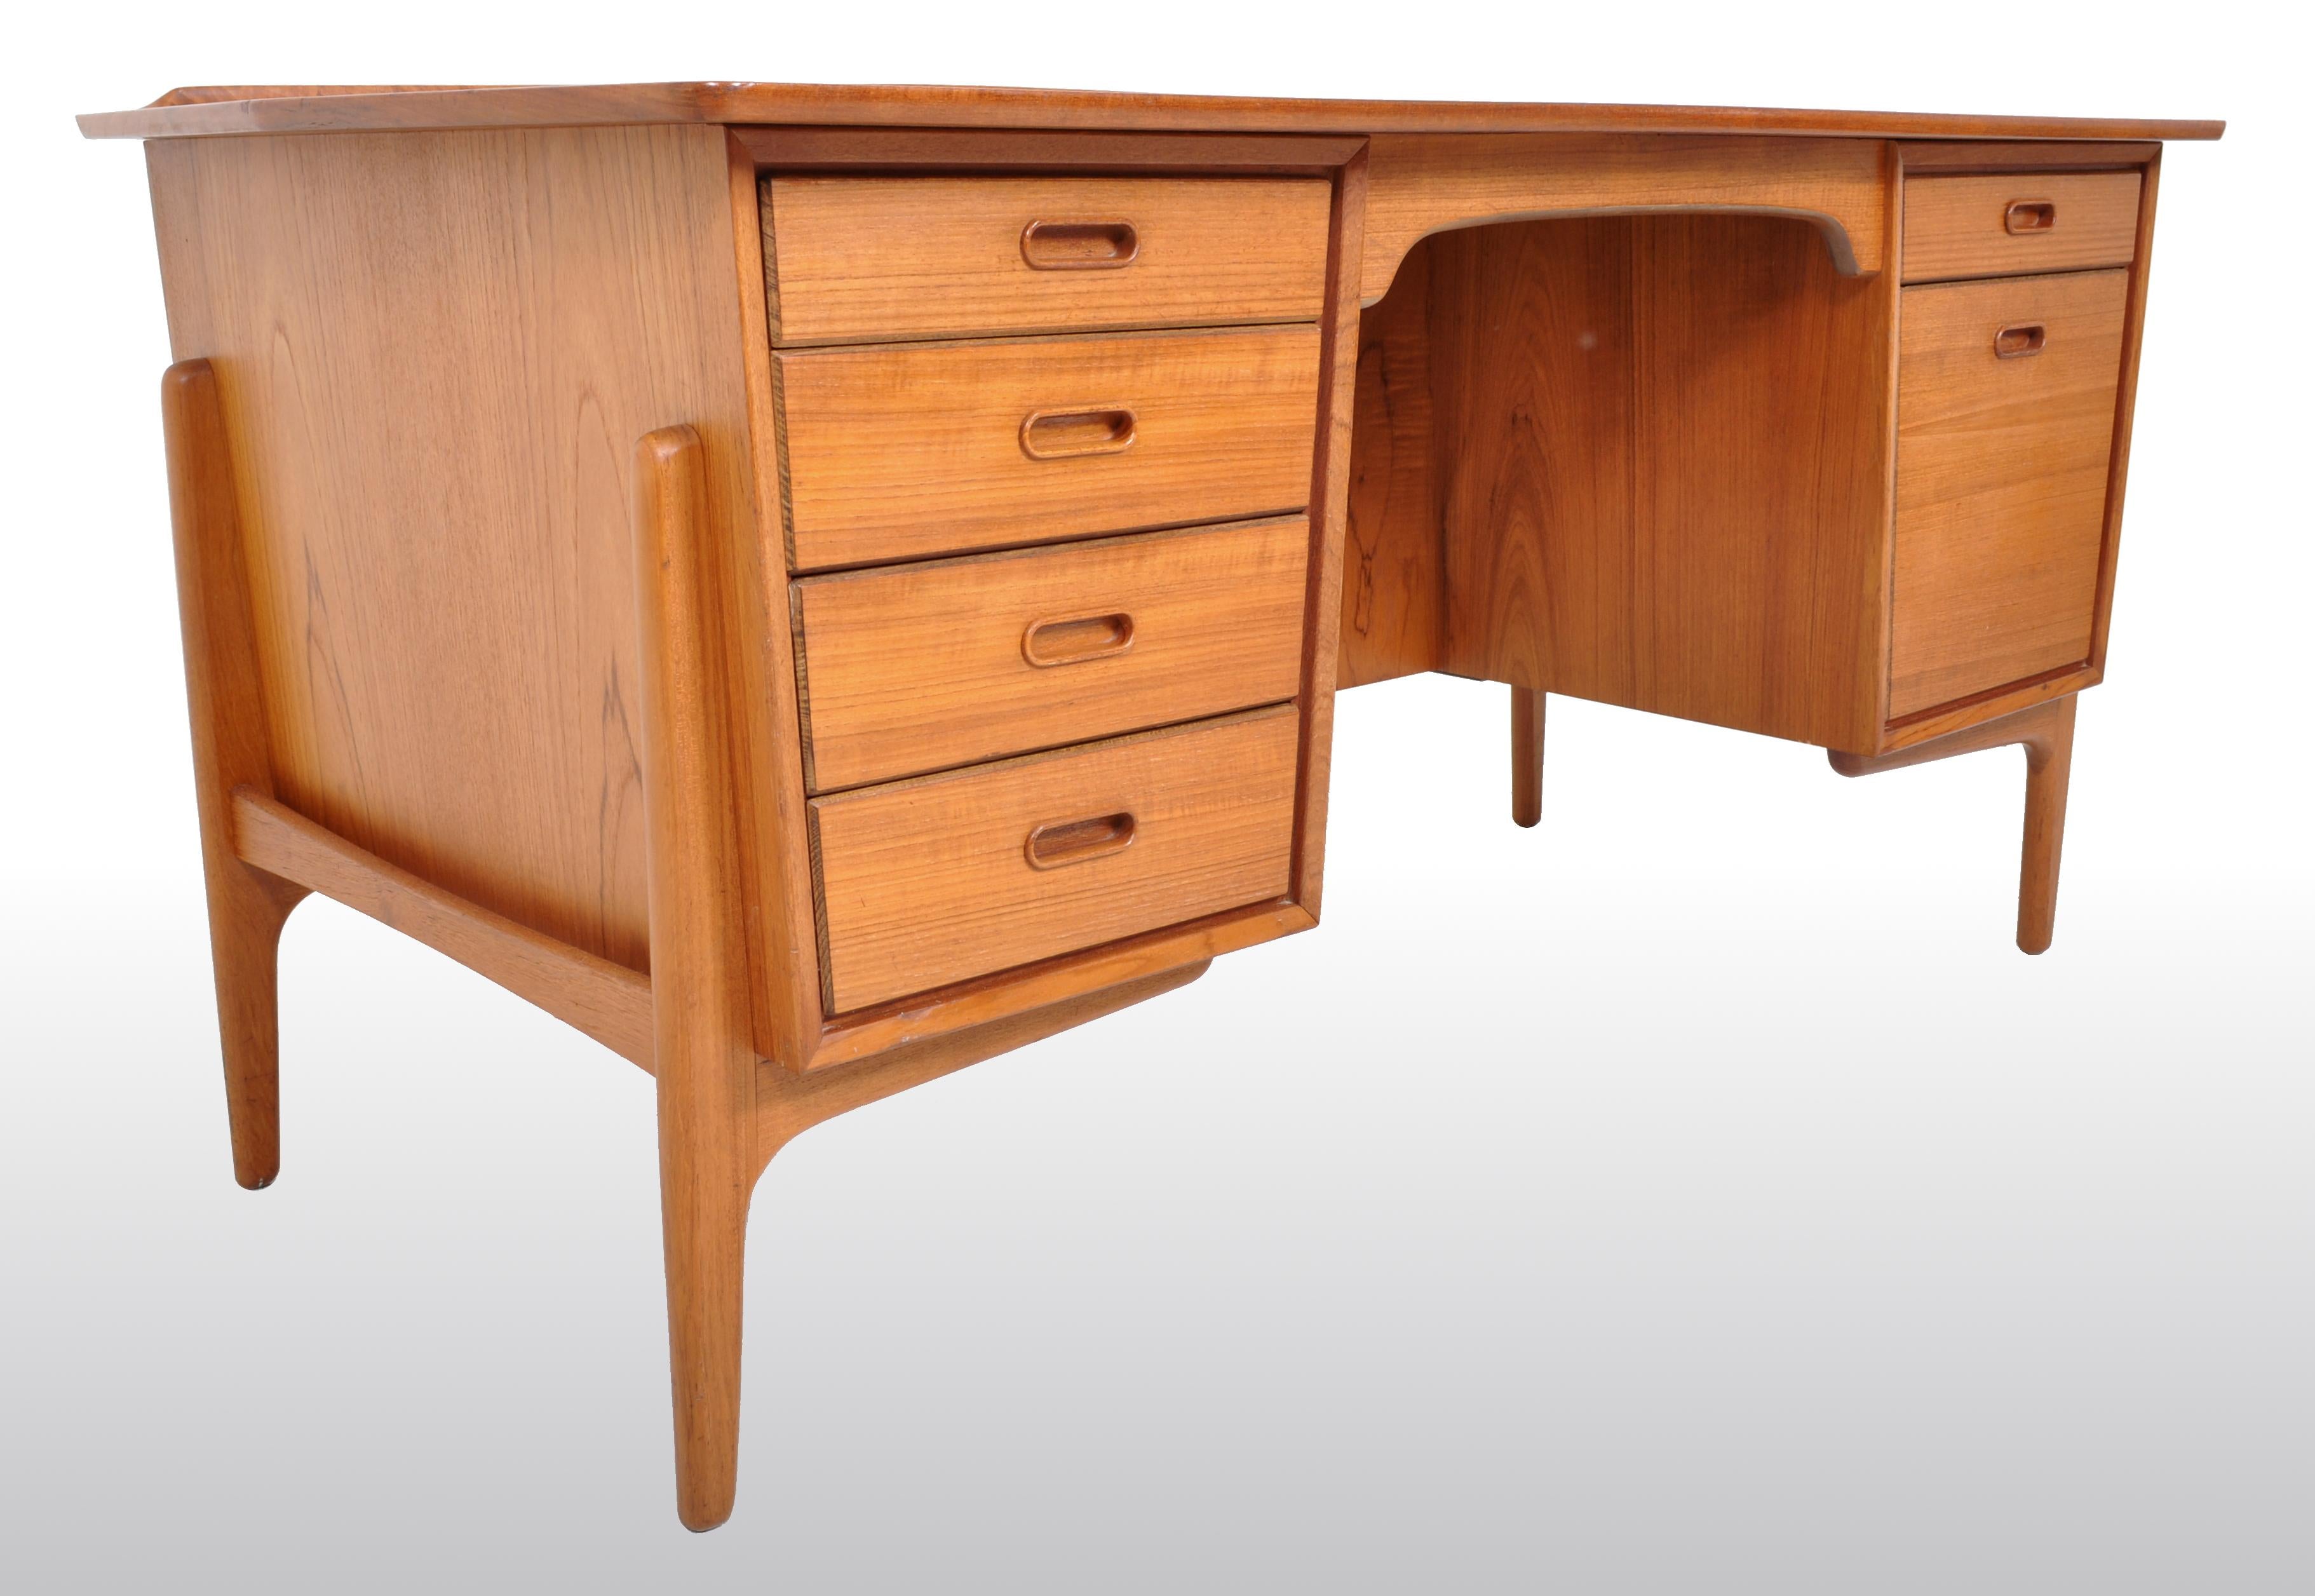 Mid-Century Modern Danish teak desk by Svend A. Madsen for Sigurd Hansen Møbelfabrik, 1960s. The desk made of solid figured teak throughout and having a gallery to the rear of the writing surface, the desk having a bank of four drawers to the left